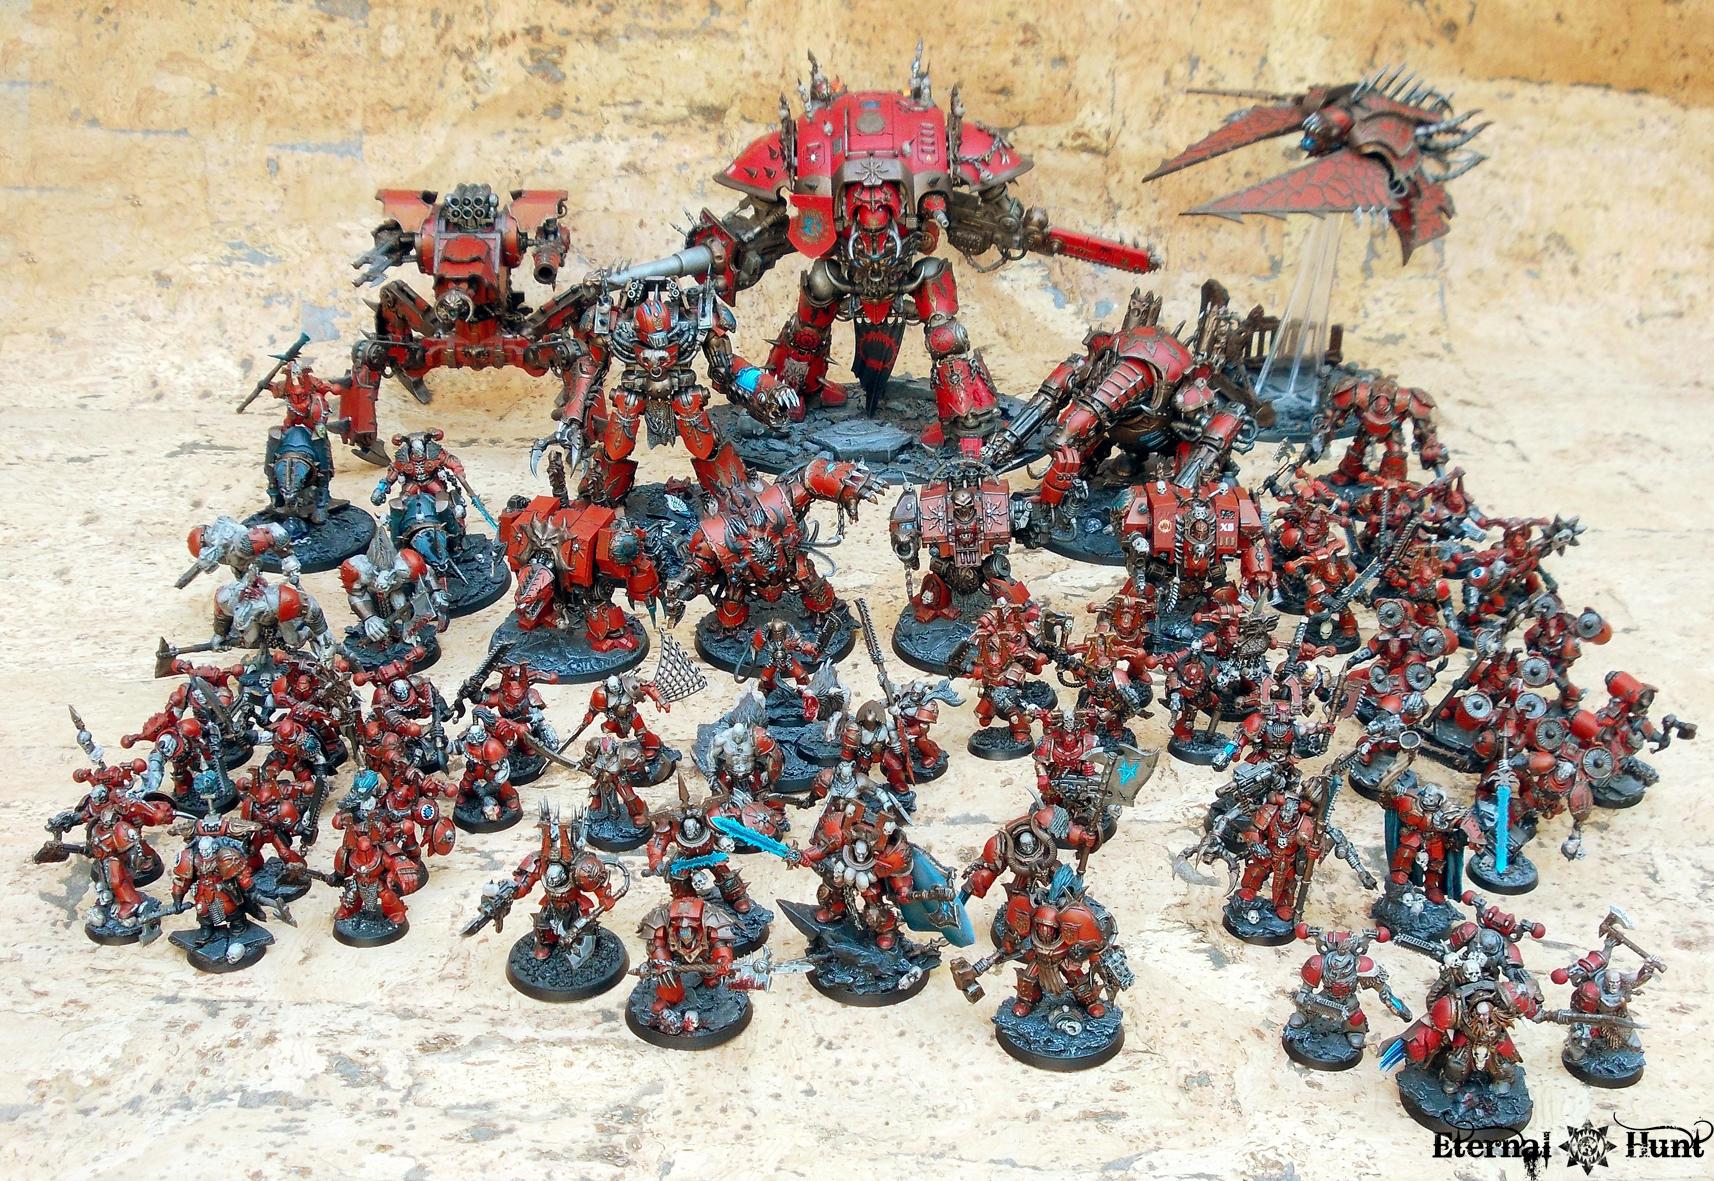 4th Assault Company, Army Showcase, Berserkers, Chaos, Chaos Space Marines, Khorne, Khorne's Eternal Hunt, Warhammer 40,000, World Eaters, Xii Legion